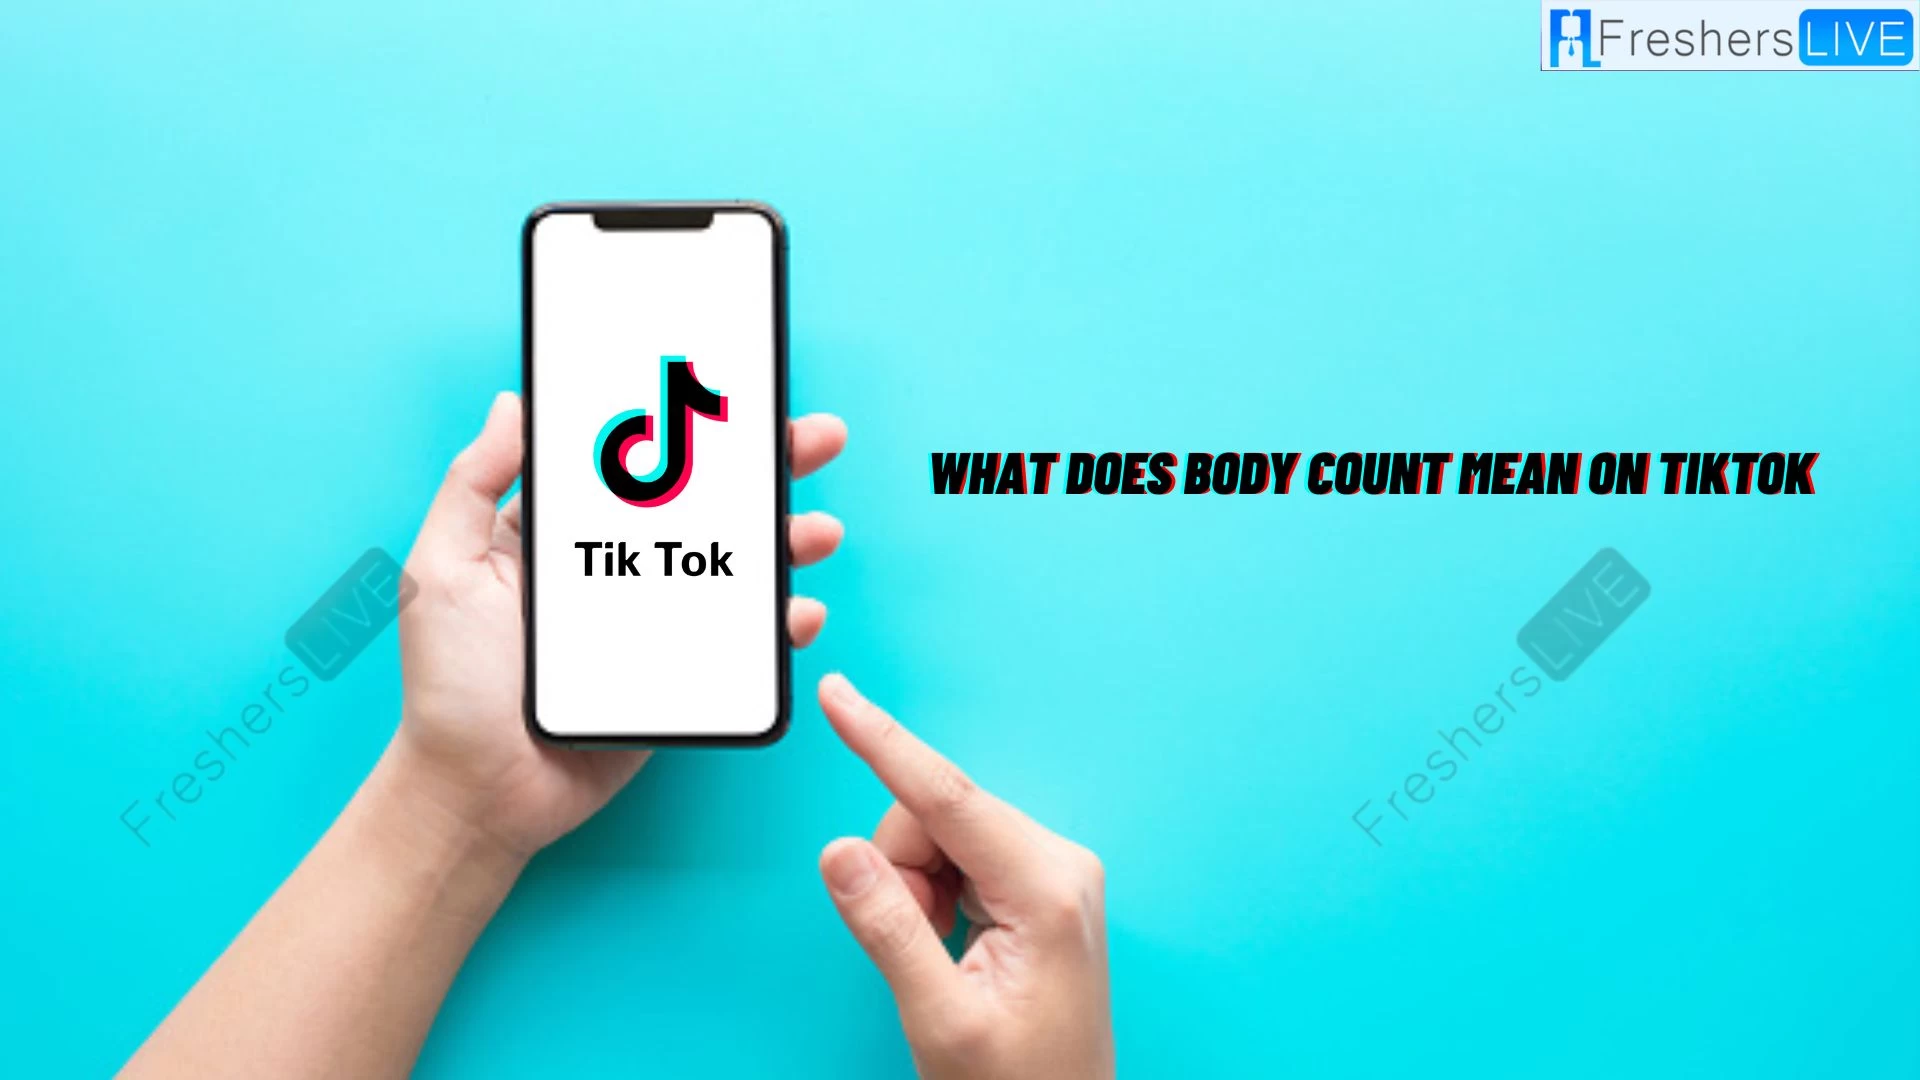 What Does Body Count Mean on TikTok? What is the TikTok Body Count Trend?